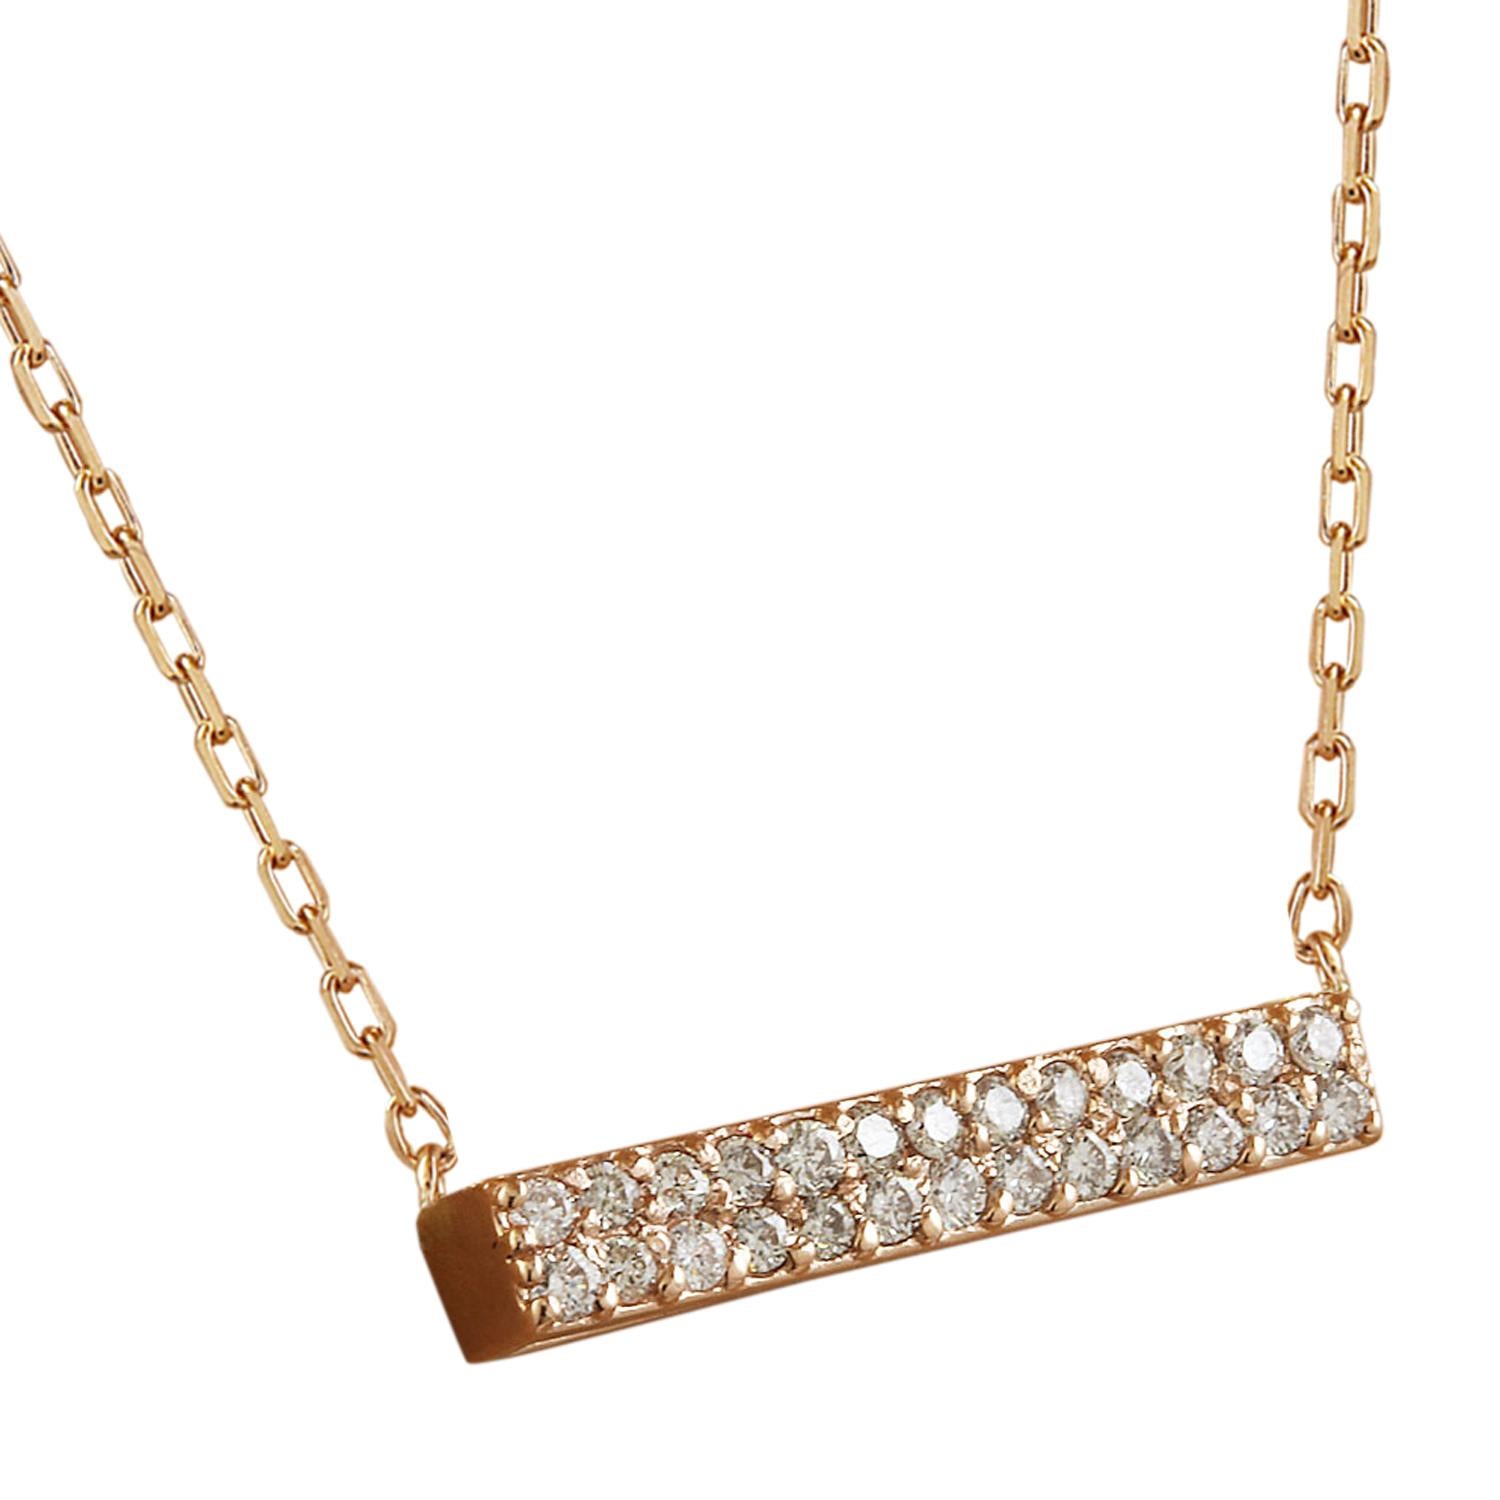 Introducing our exquisite 0.40 Carat Natural Diamond Bar Necklace in 14 Karat Rose Gold. Stamped with 14K authenticity, this necklace weighs 2 grams and has a length of 16 inches. Adorning the necklace is a total of 26 natural diamonds, weighing